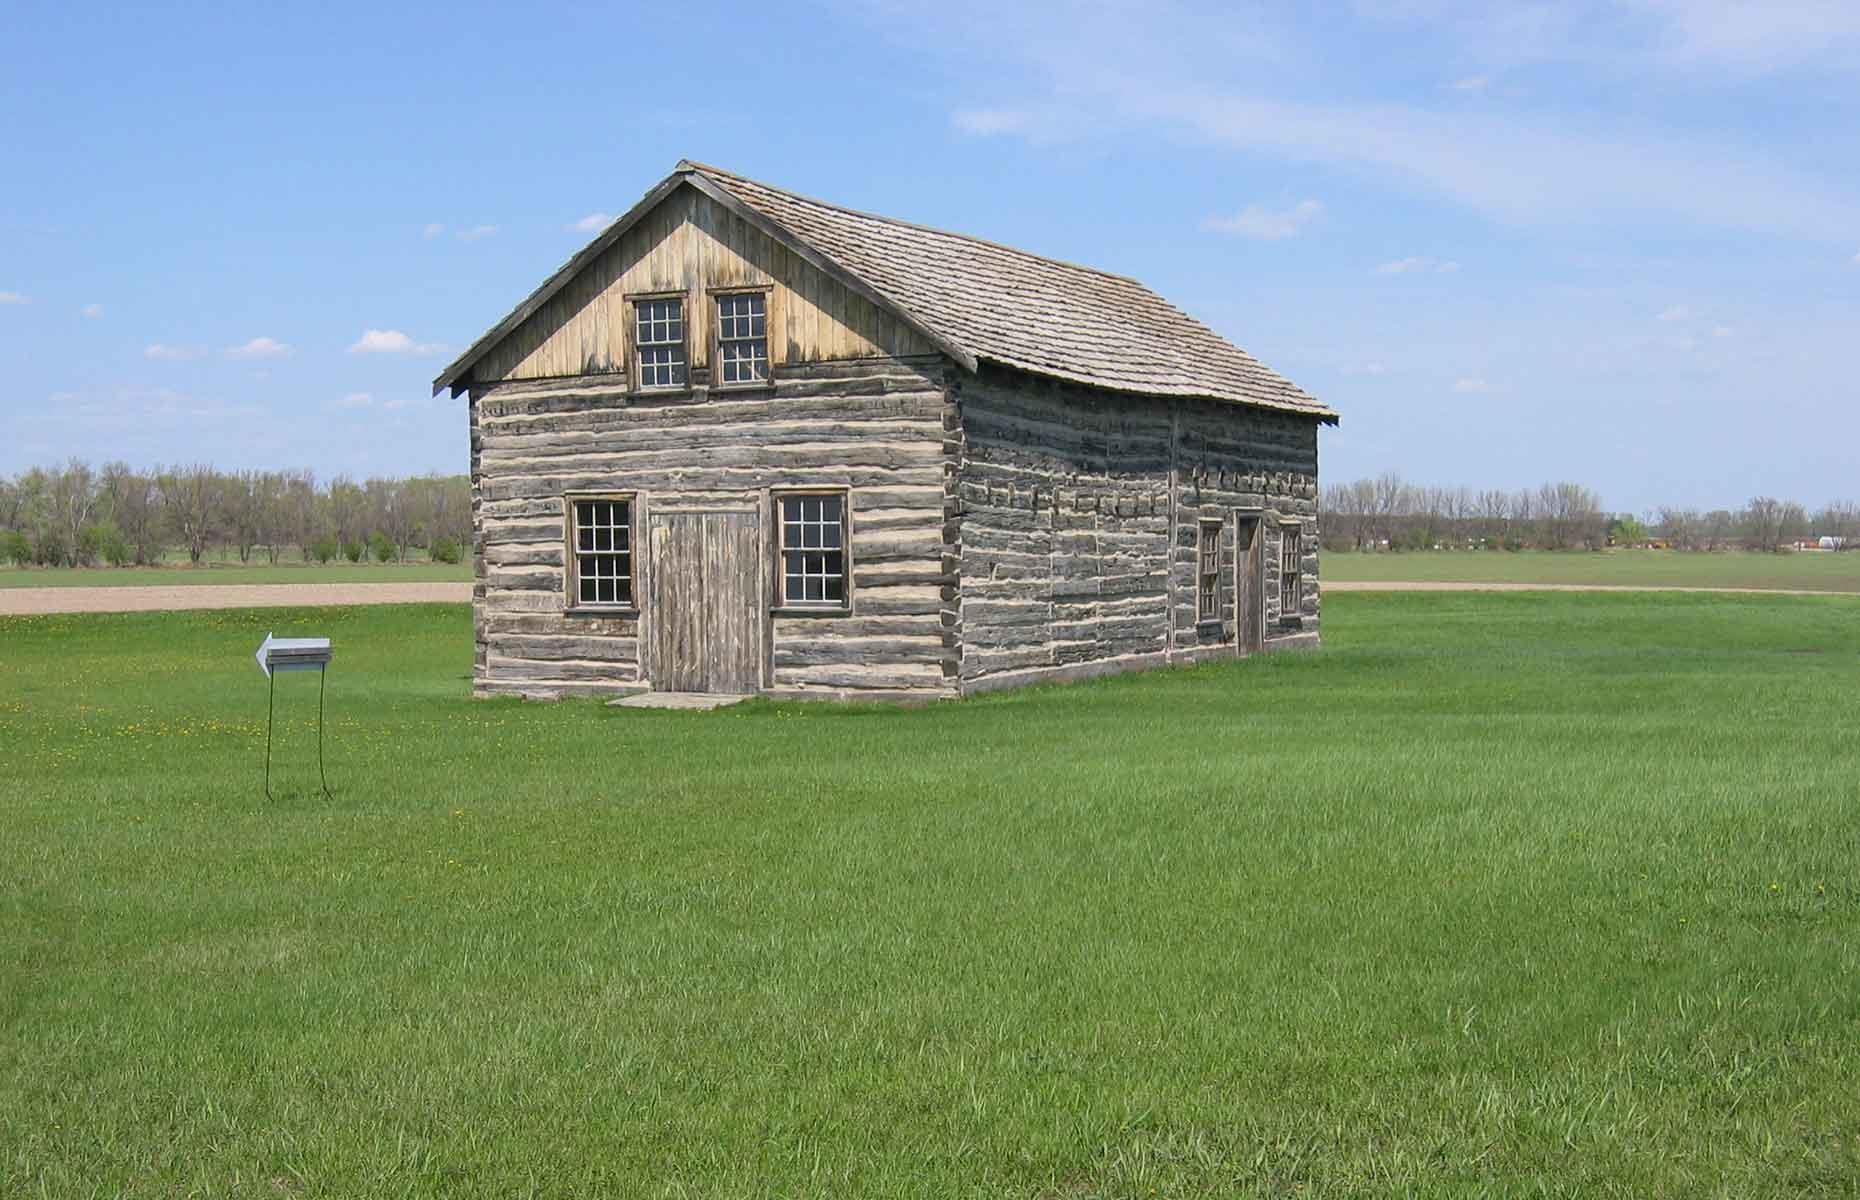 <p>Prominent Metis (mixed European and Native American) fur trader Antoine Gingras constructed <a href="https://www.history.nd.gov/historicsites/gingras/index.html">this oak log trading post</a> in 1844 using dovetailed and pegged joints. The original logs are still exposed today (pictured), and remain fragile. However, the second building on the site, the family home, has been restored to its colourful former glory. Step inside to read the interpretative panels telling you more about this historic place, as well as about Métis culture.</p>